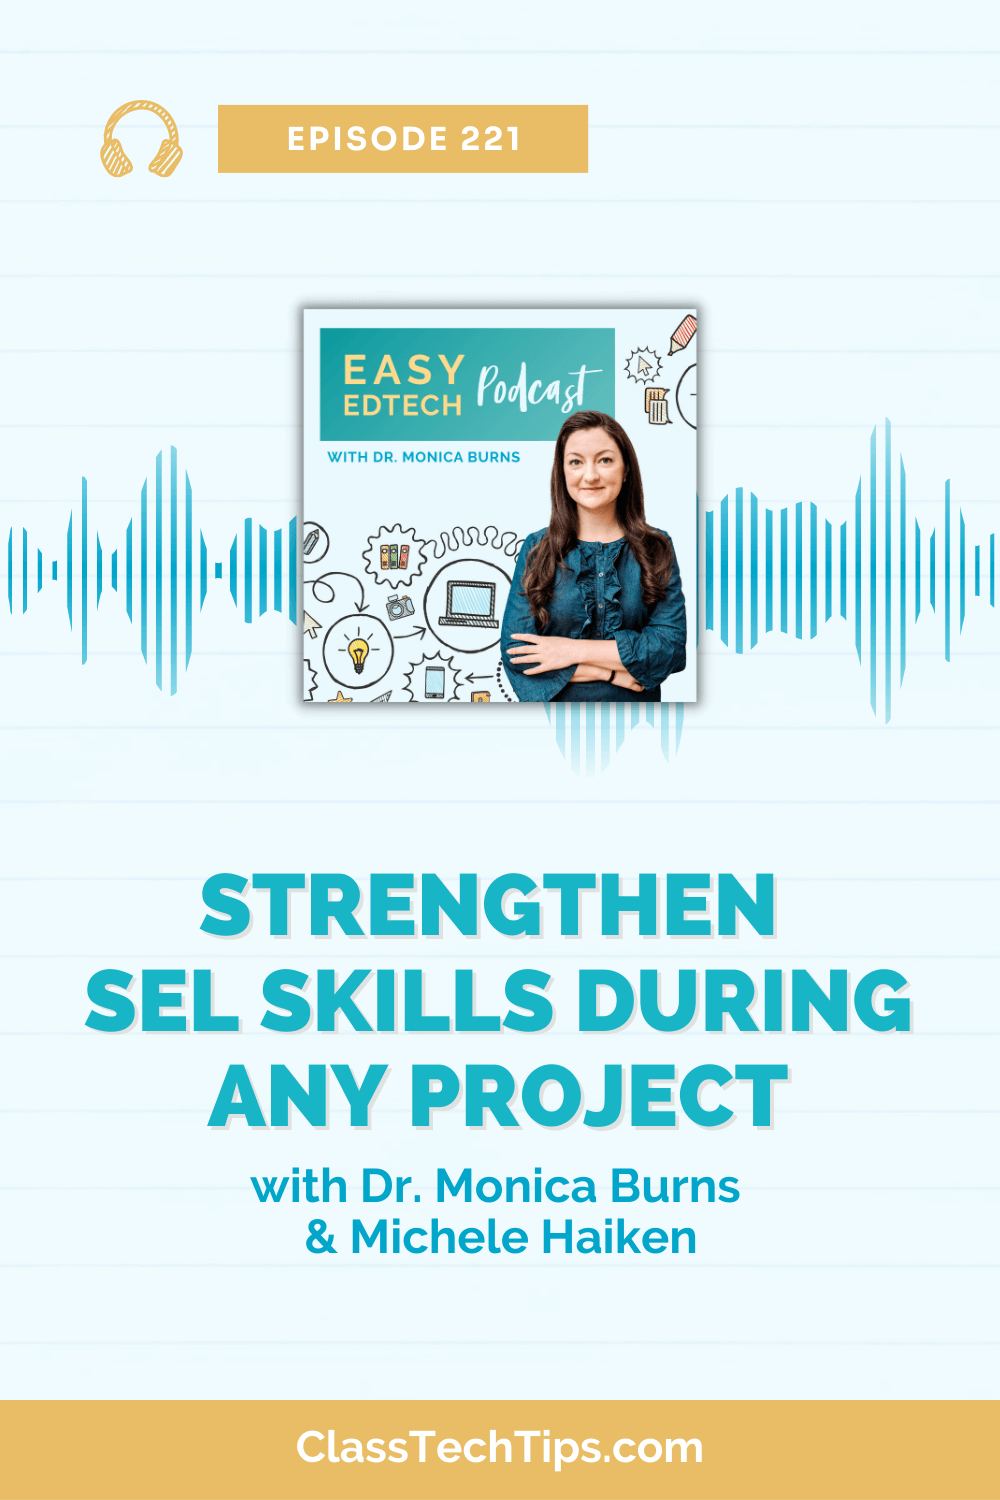 Featured image with podcast logo and soundwaves for an episode featuring educator Dr. Michele Haiken discussing creative projects and EdTech tools for Social-Emotional Learning.